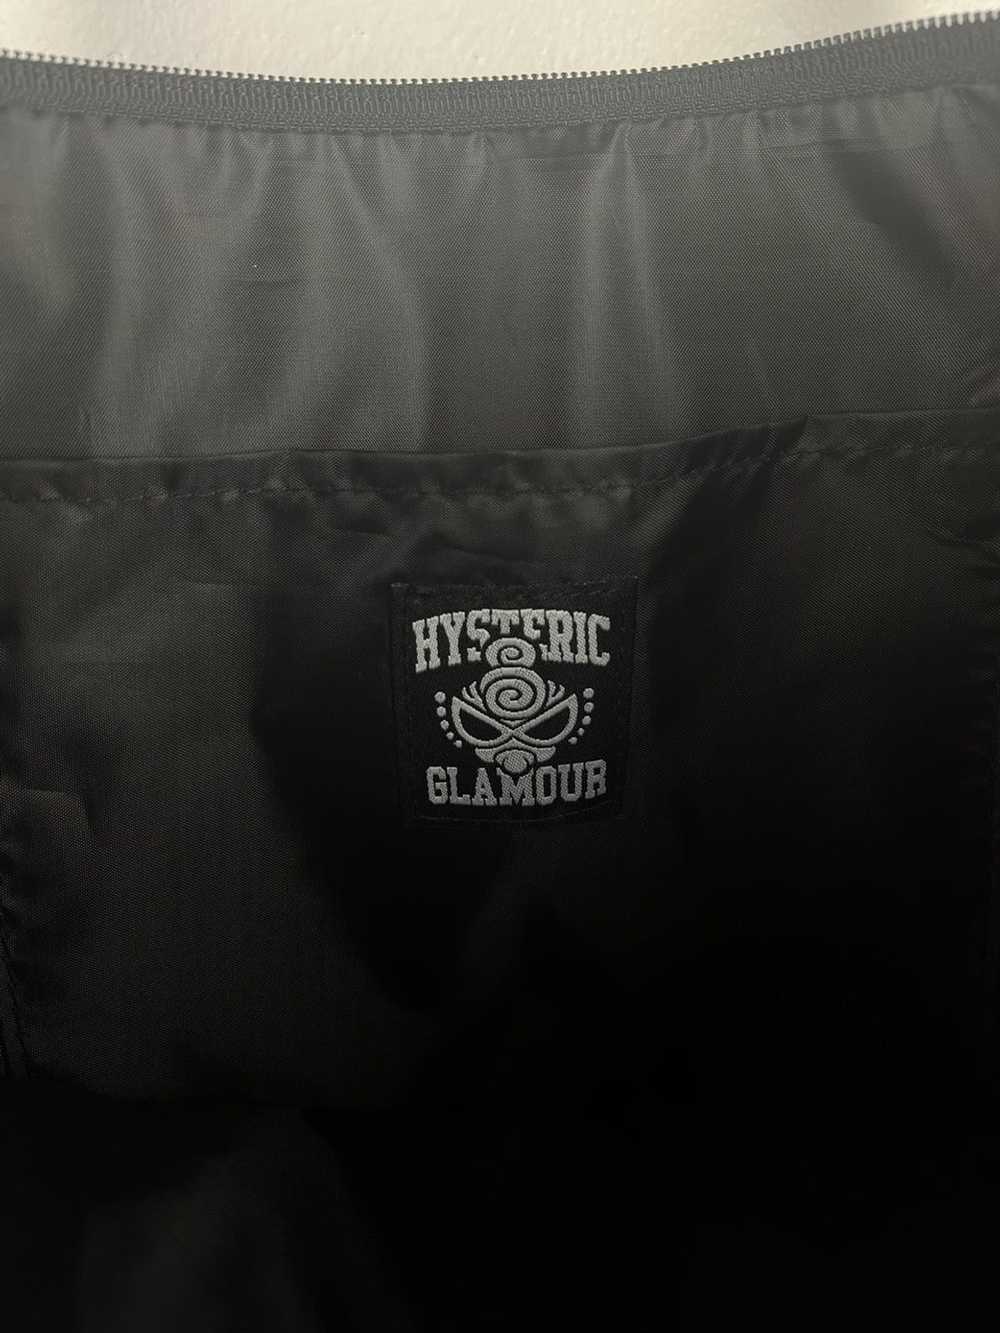 Hysteric Glamour Hysteric Glamour Tote - image 3